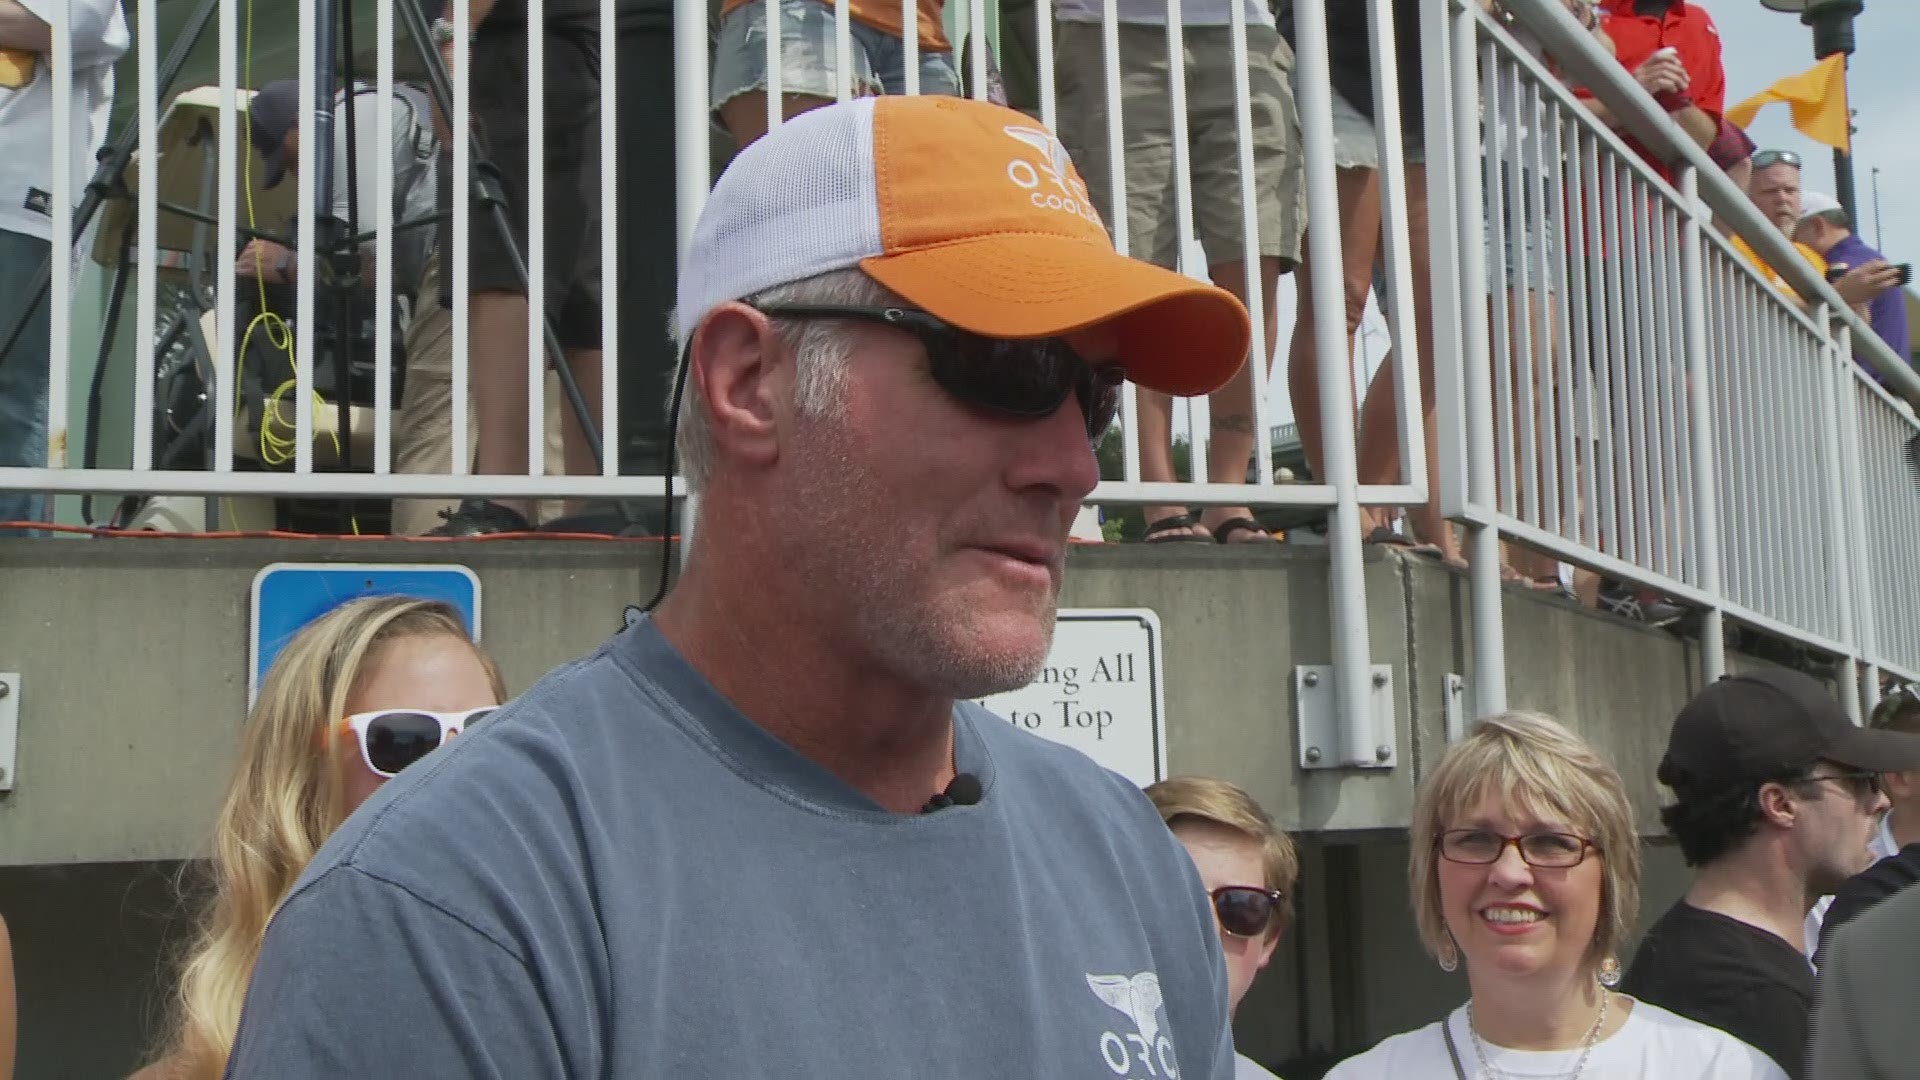 NFL Hall of Famer Brett Favre promotes Orca coolers before Saturday's game against Georgia. Favre talked retirement, Knoxville, Peyton Manning, Reggie White, and more football topics.